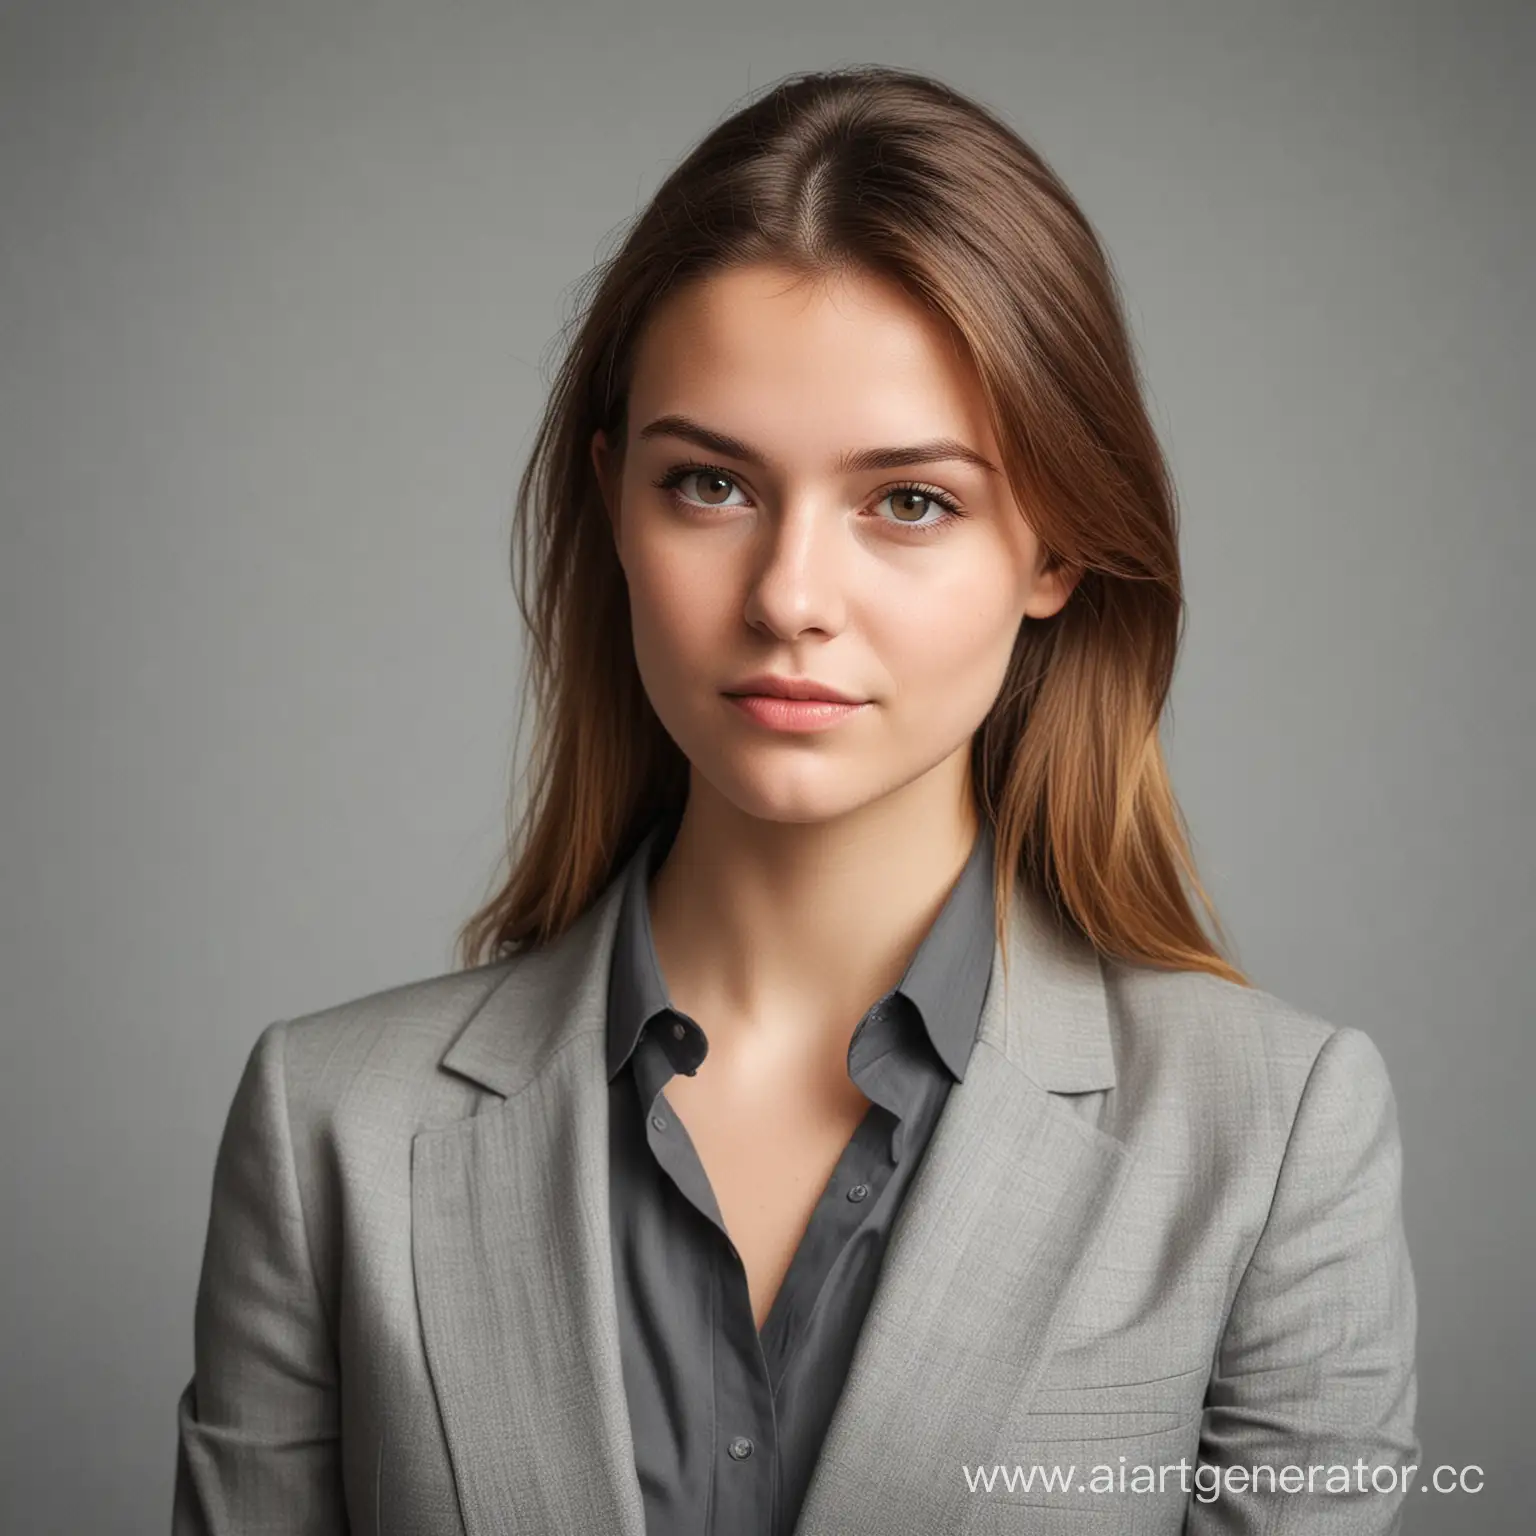 Professional-Portrait-of-a-Girl-from-a-Management-Agency